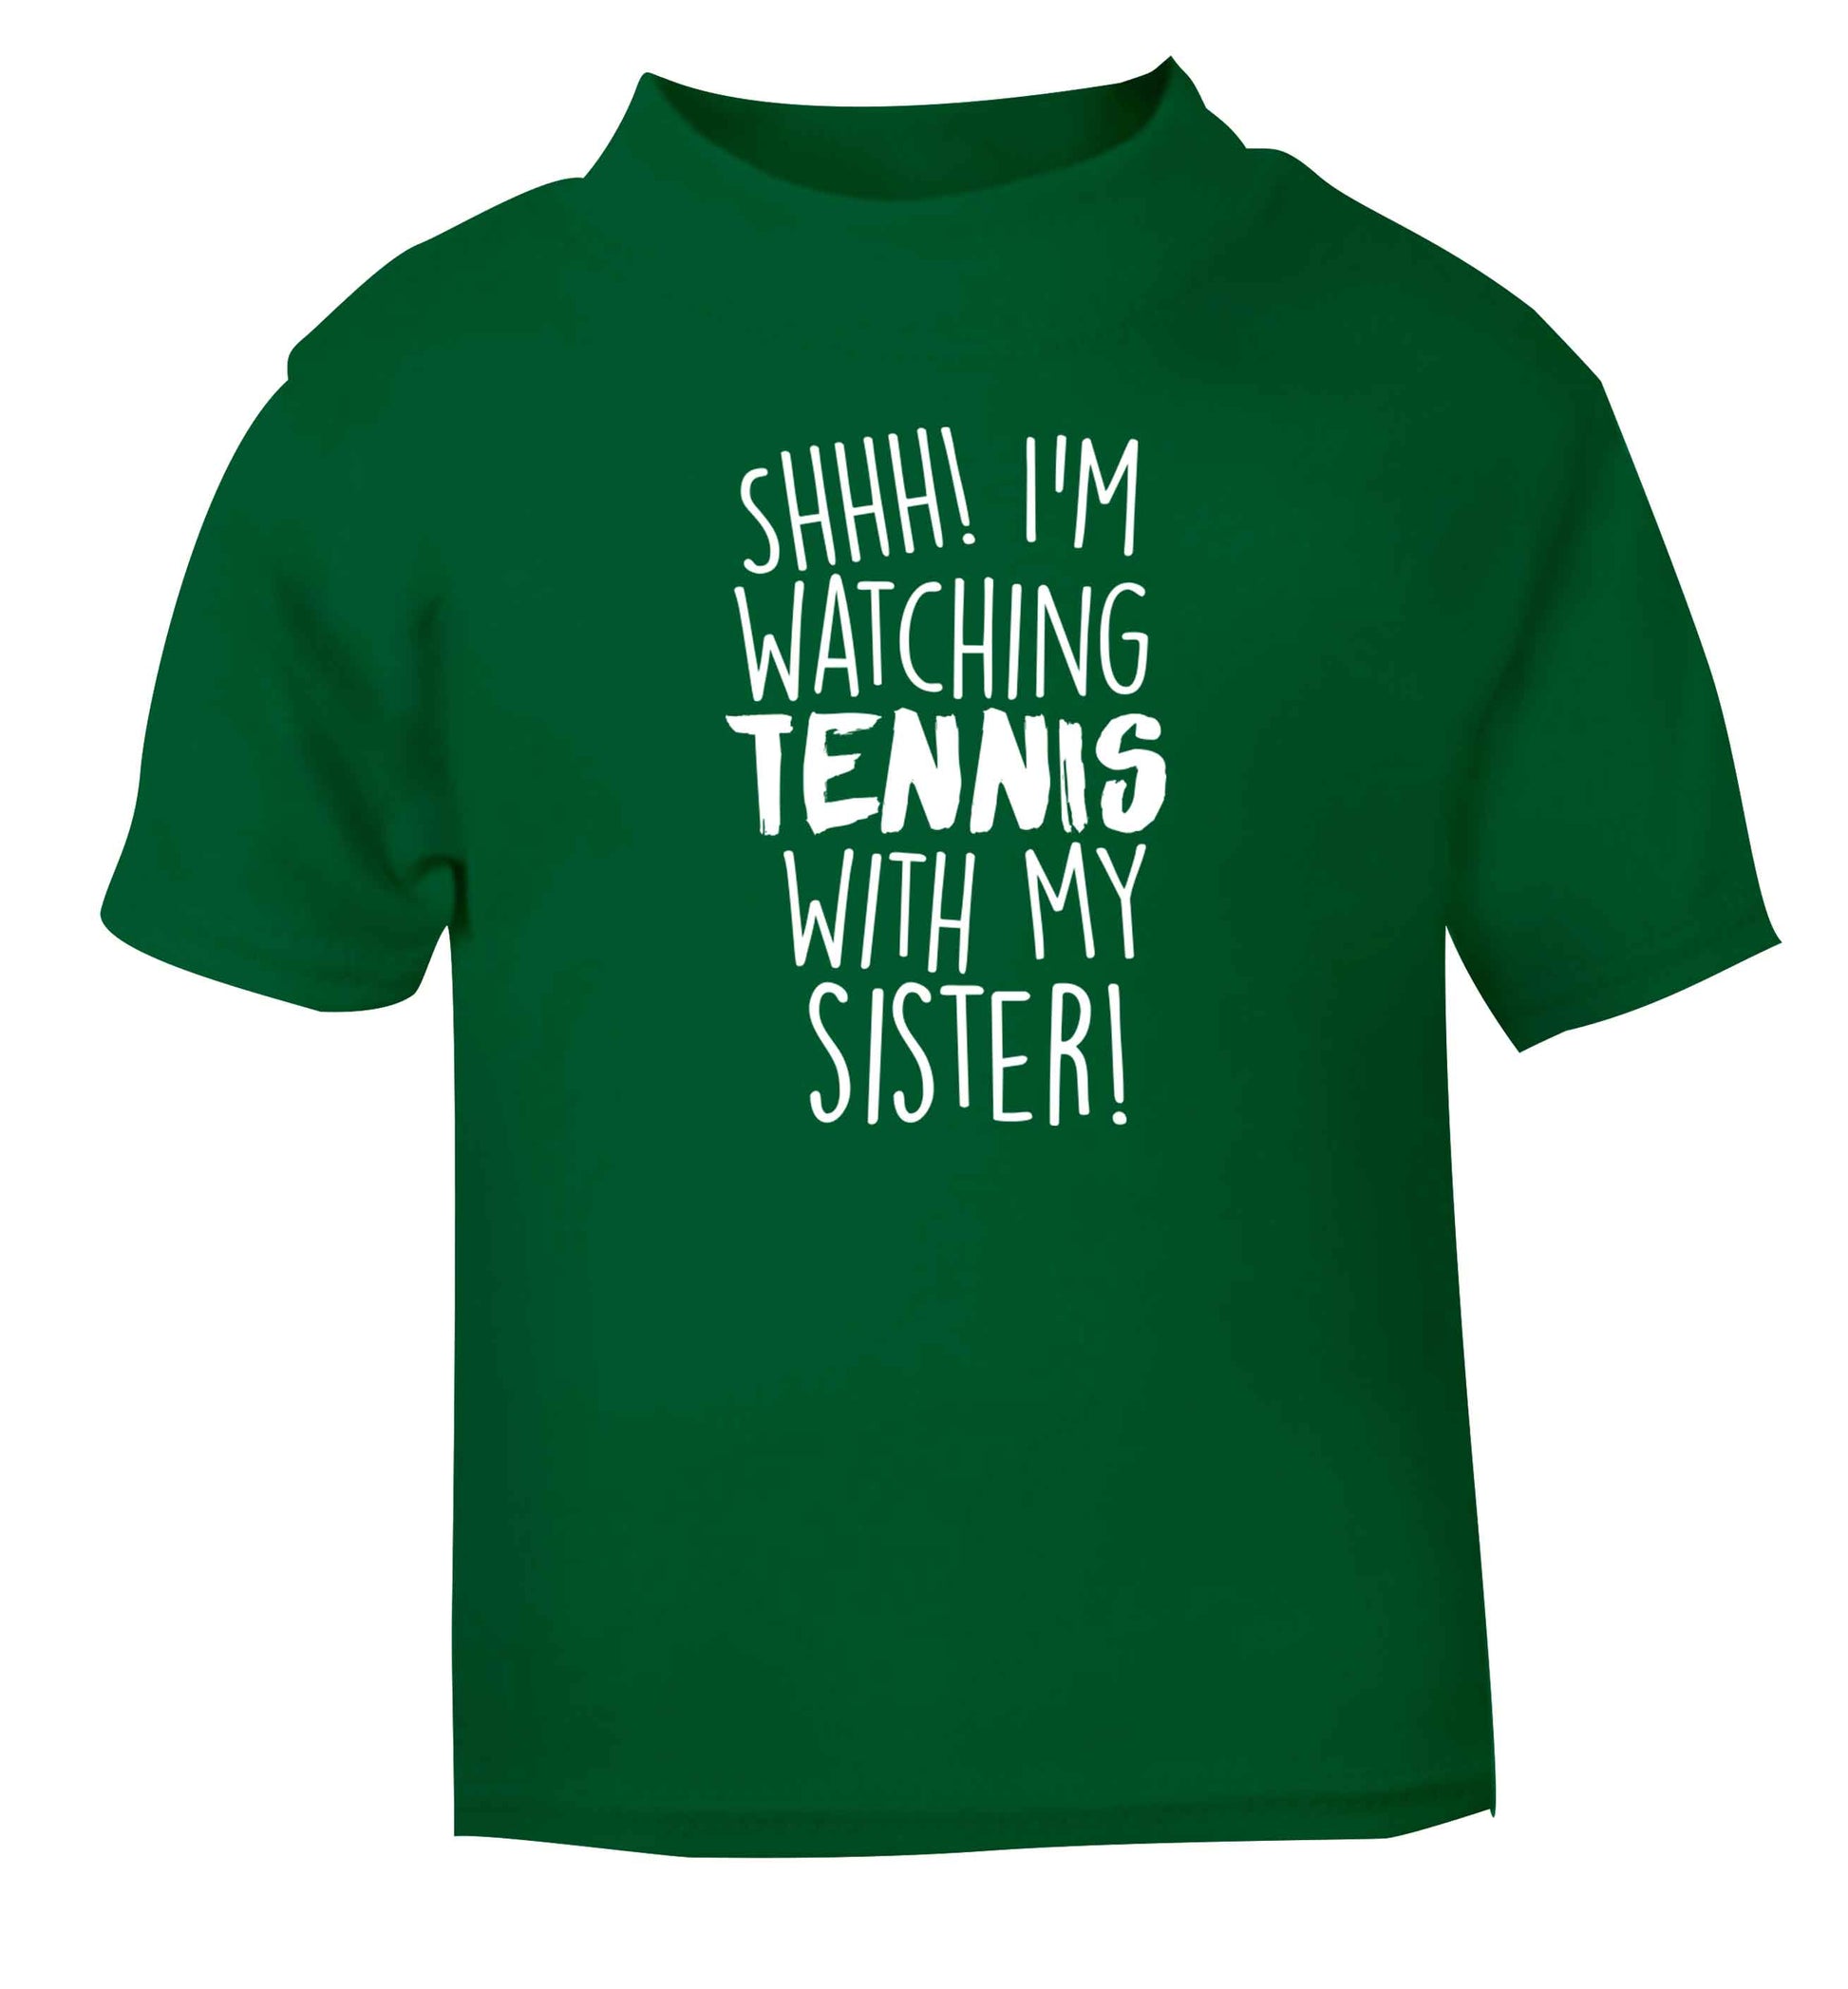 Shh! I'm watching tennis with my sister! green Baby Toddler Tshirt 2 Years